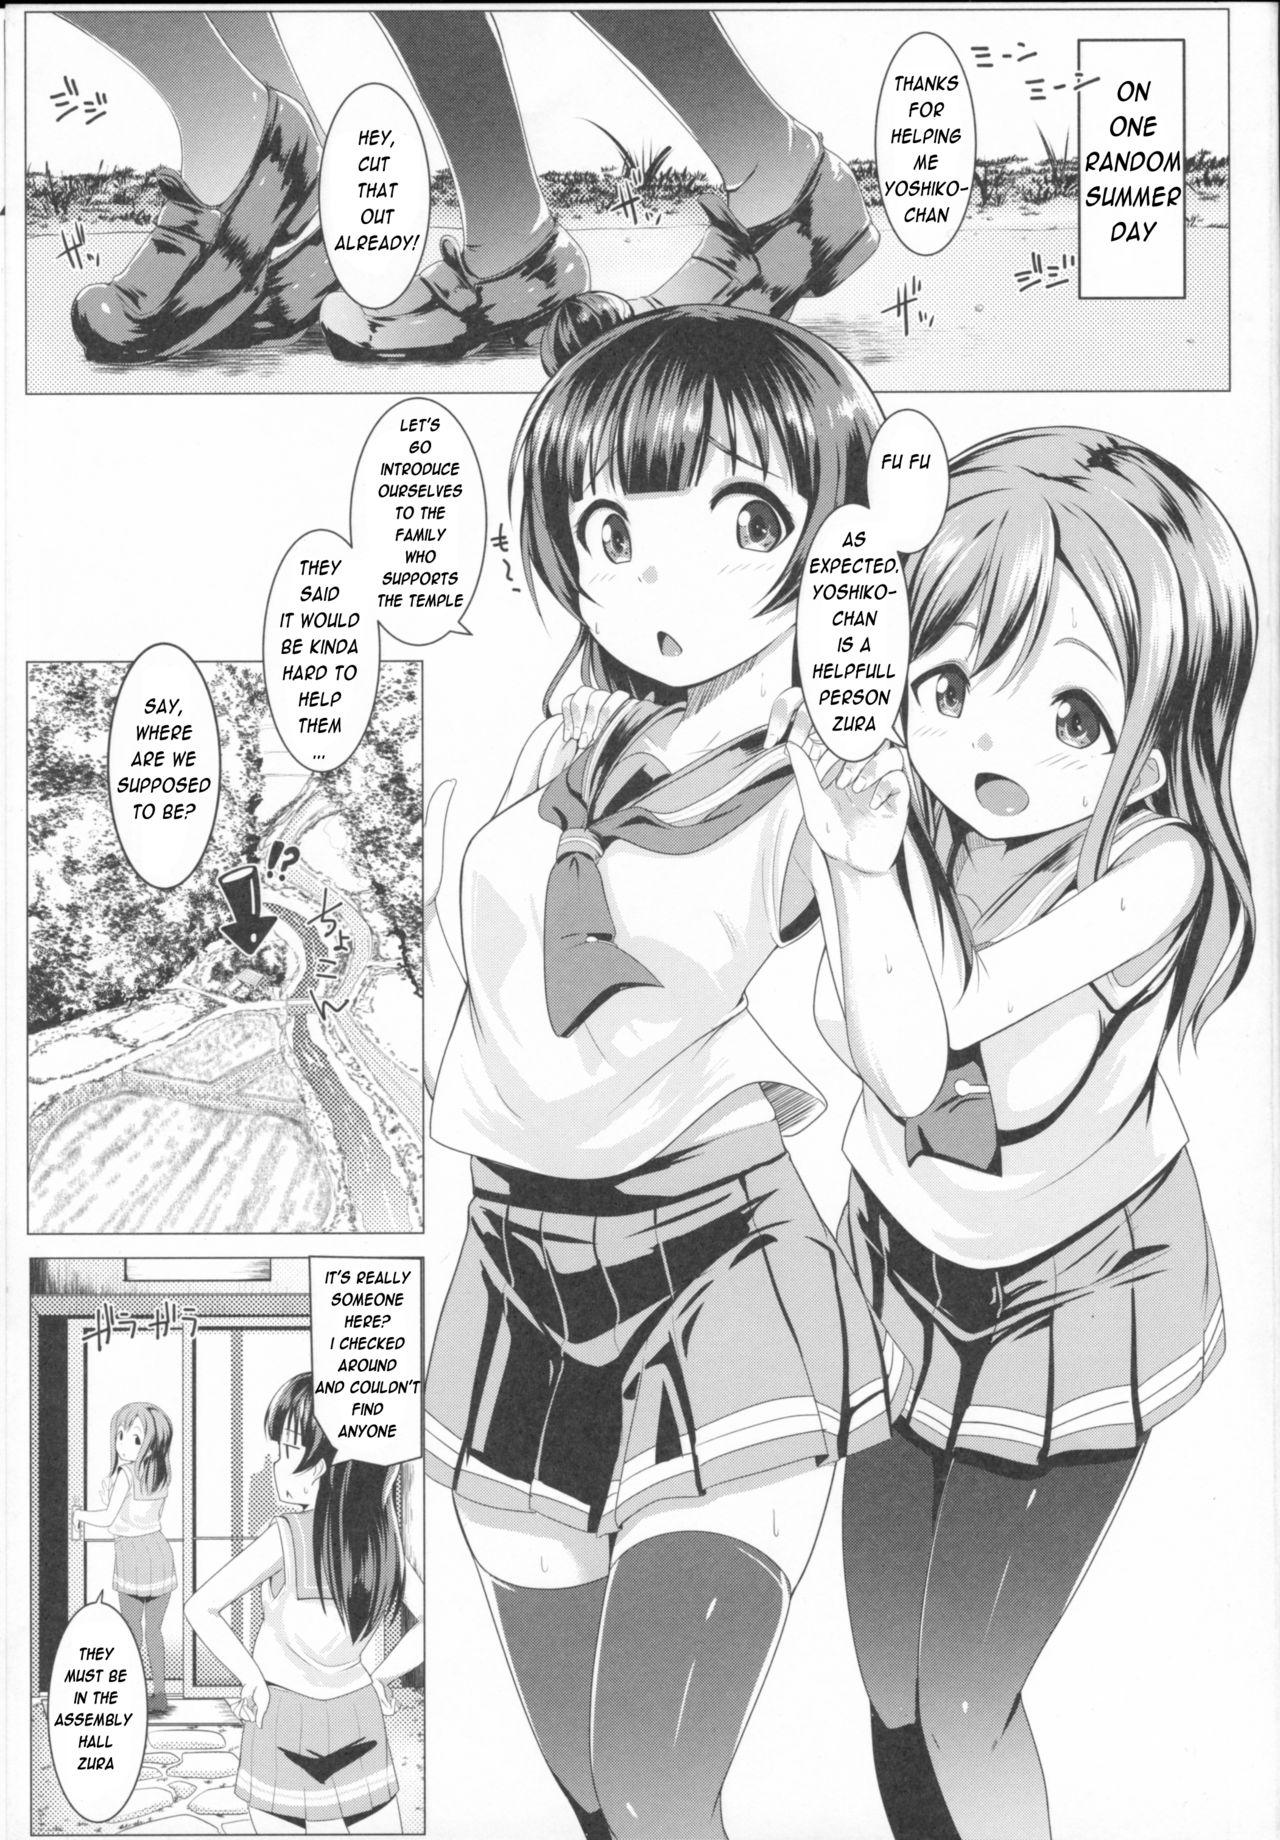 Messy SUMMER PROMISCUITY with Yoshimaruby - Love live sunshine Whooty - Page 4